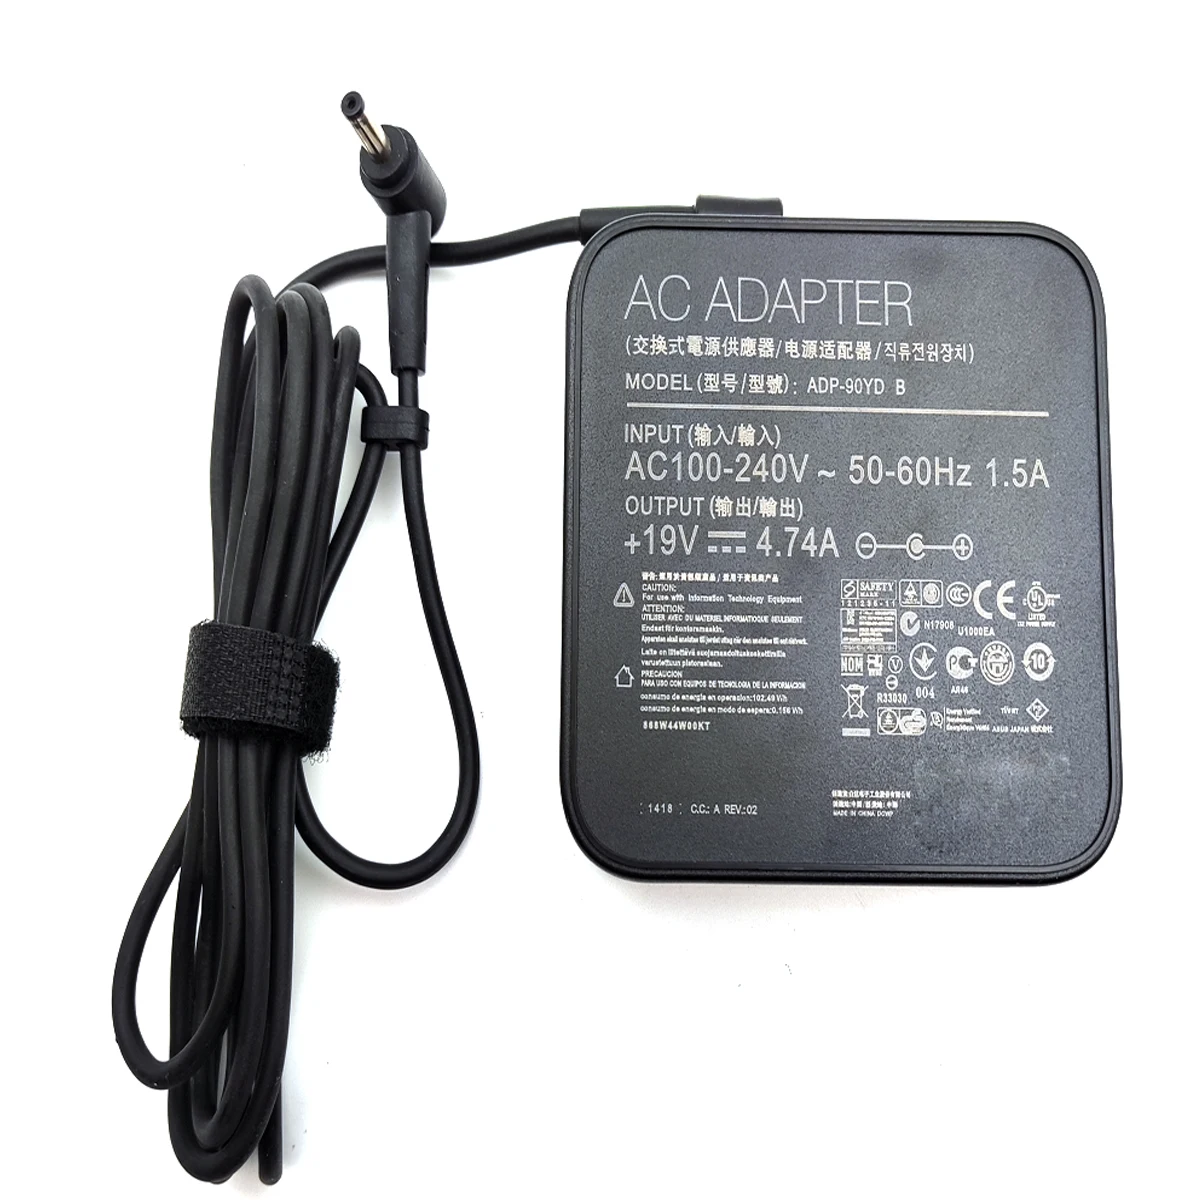  19V 4.74A 90W ADP-90YD B AC Adapter Charger Compatible for Asus  K55A K55N K501UX K53E Q550L U56E A55A K751L A450J A450VC X53E X551M X555LA  K550D A55V Laptop Power Supply Cord 